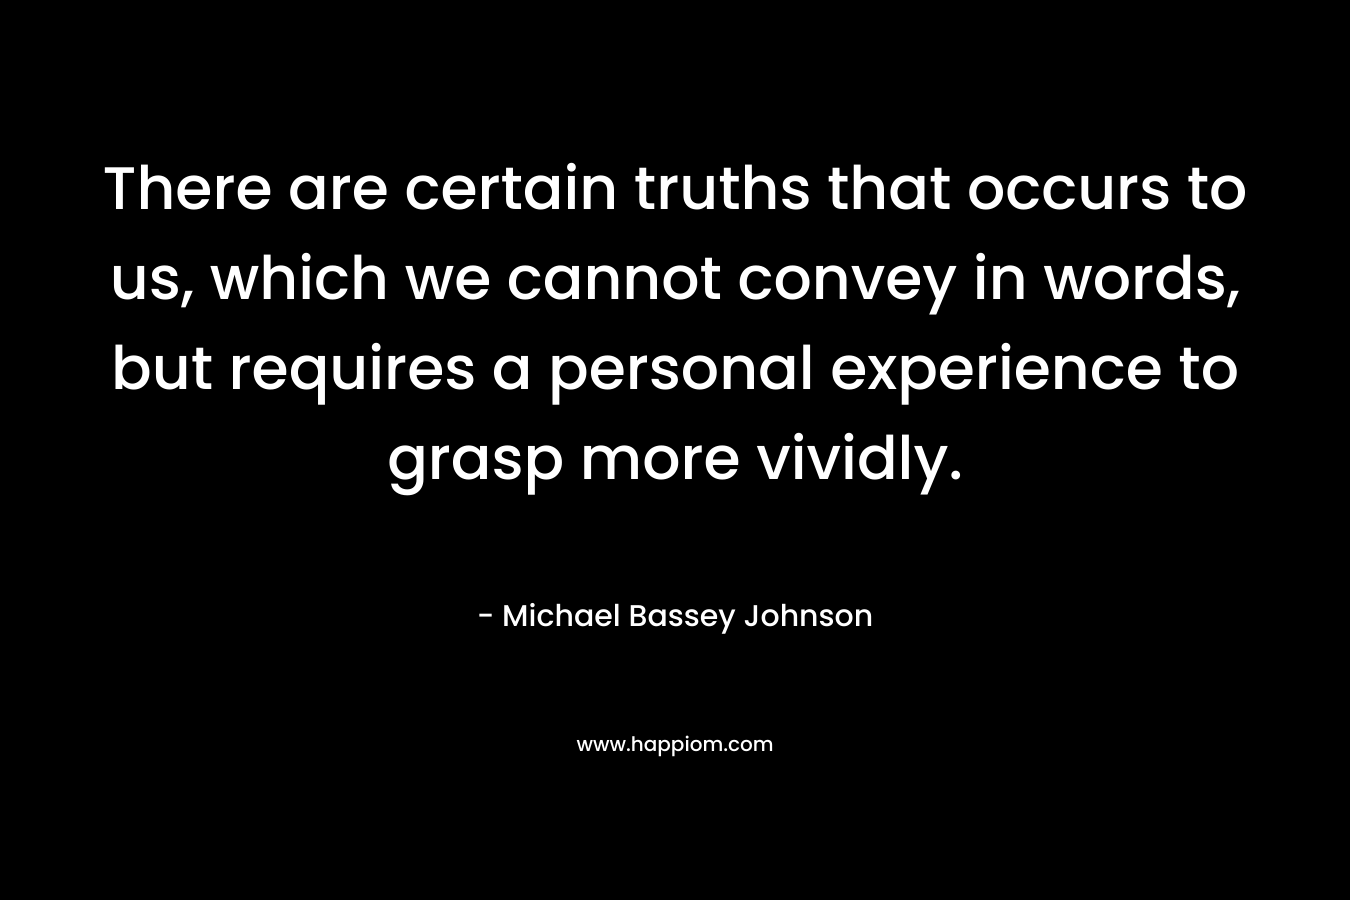 There are certain truths that occurs to us, which we cannot convey in words, but requires a personal experience to grasp more vividly. – Michael Bassey Johnson